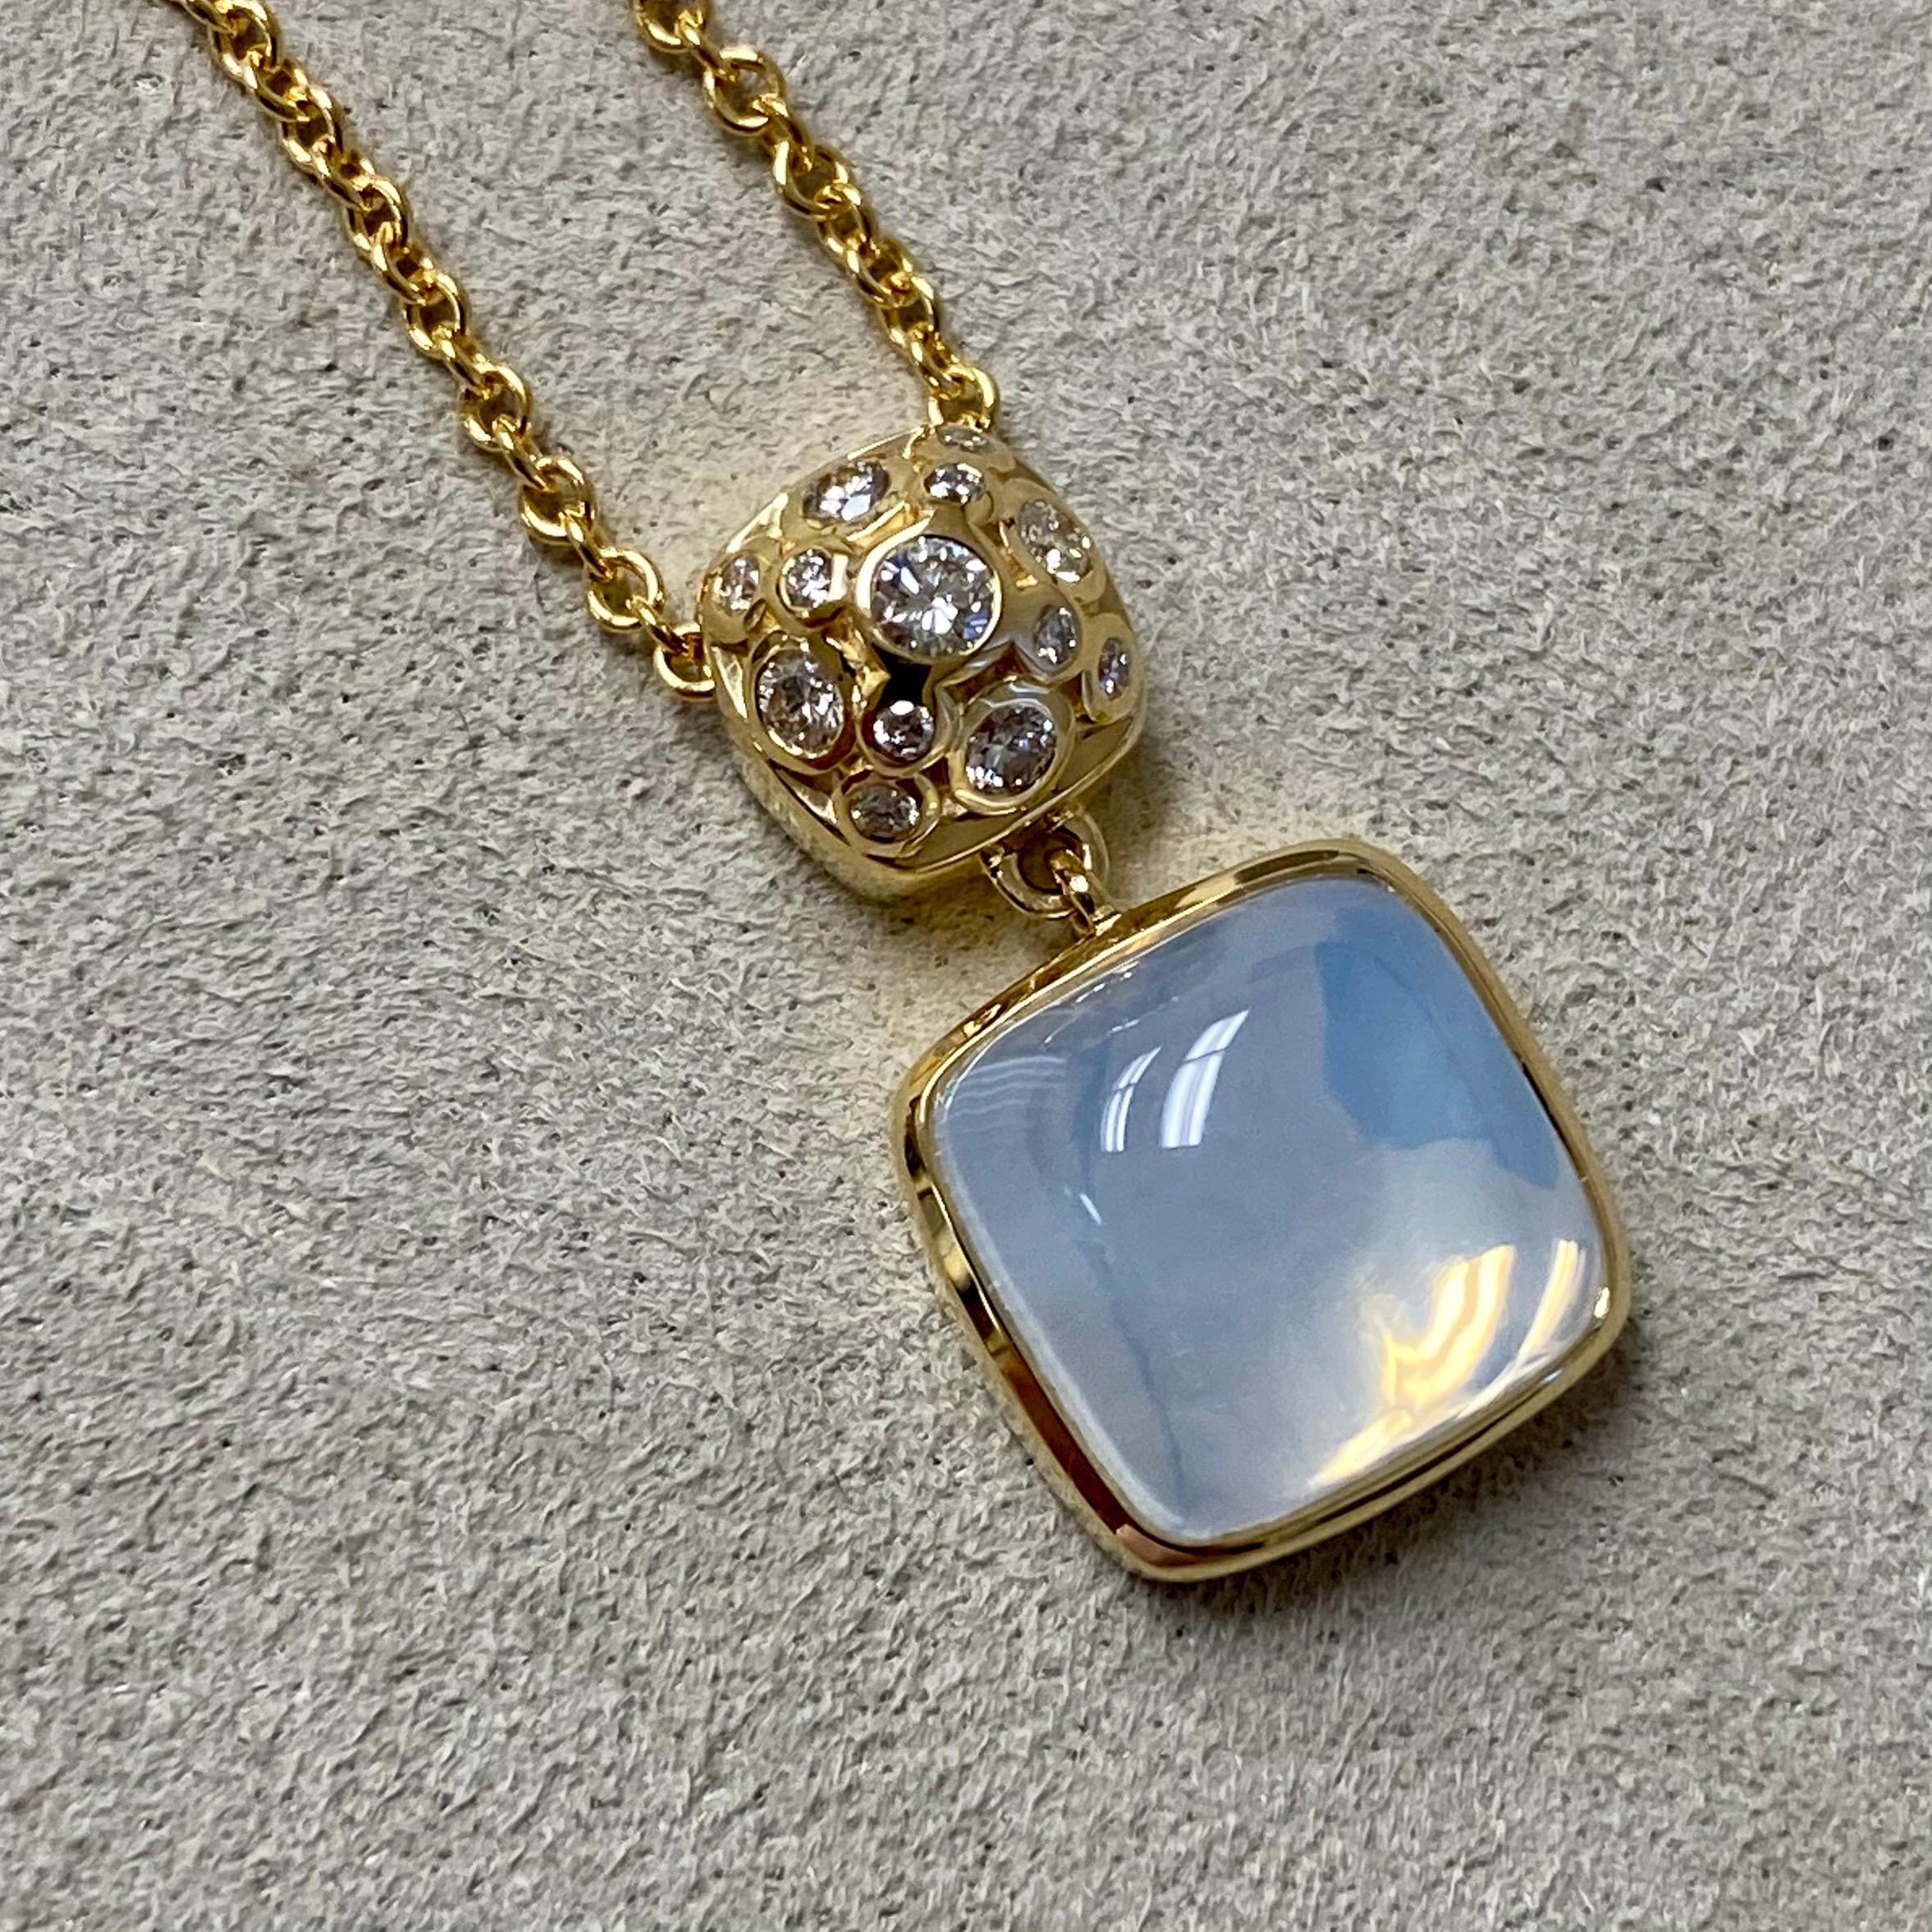 18 inch Necklace created in 18 karat yellow gold
Moon Quartz sugarloaf 5.5 carats approx.
Diamonds 0.15 carat approx.
Can be worn at 16th and 17th inch
Limited edition

Presenting an exquisite 18-inch Pendant crafted in 18-karat yellow gold,